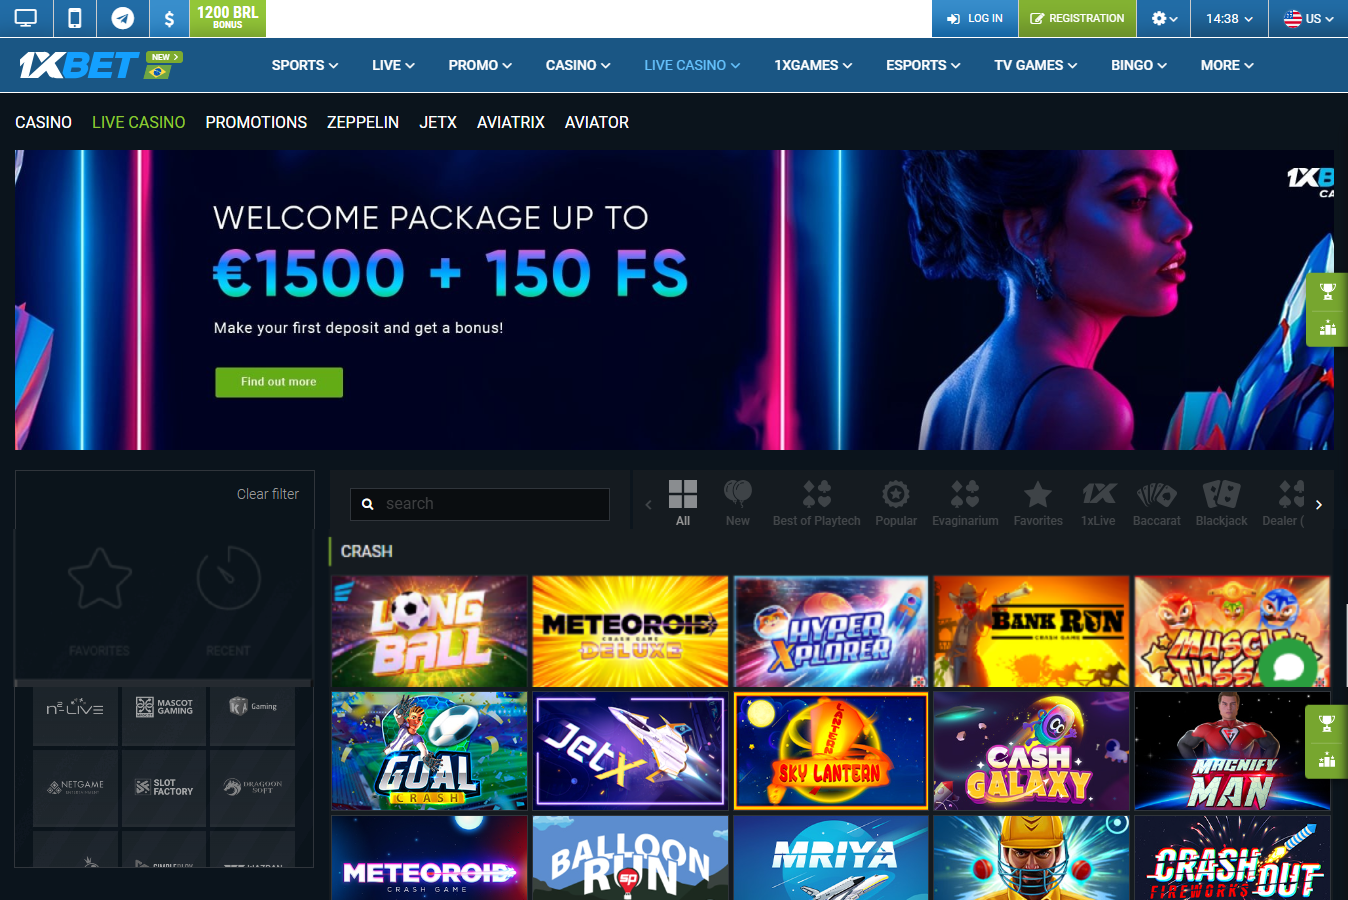 1xbet home page with advertising offer Welcome package and games library